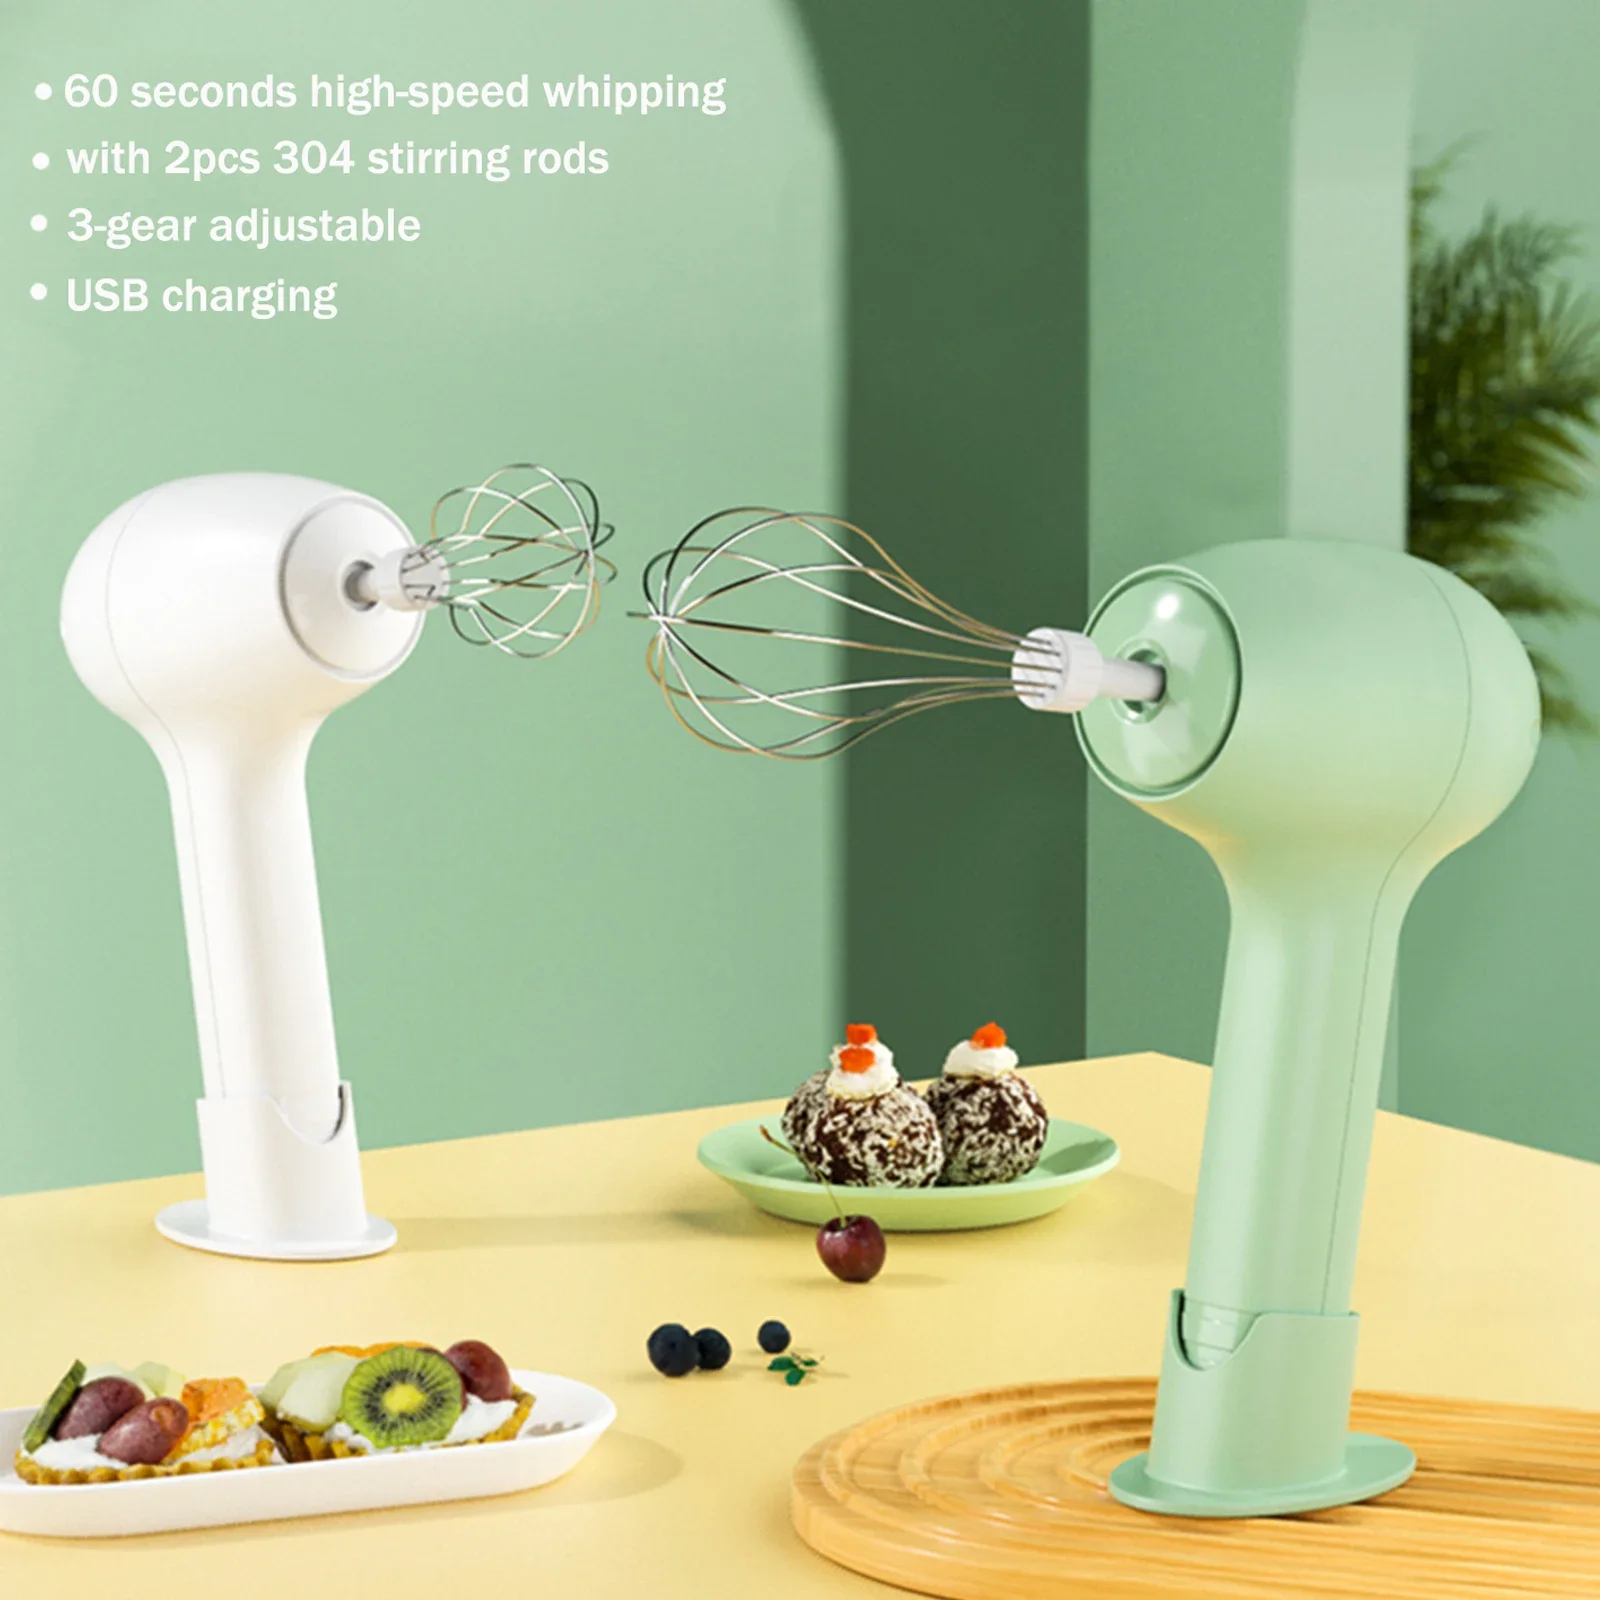 

Mini Wireless Electric Food Mixer 3 Speeds Automatic Whisk Butter Egg Beater Baking Cake Cream Whipper Kitchen Hand Blender